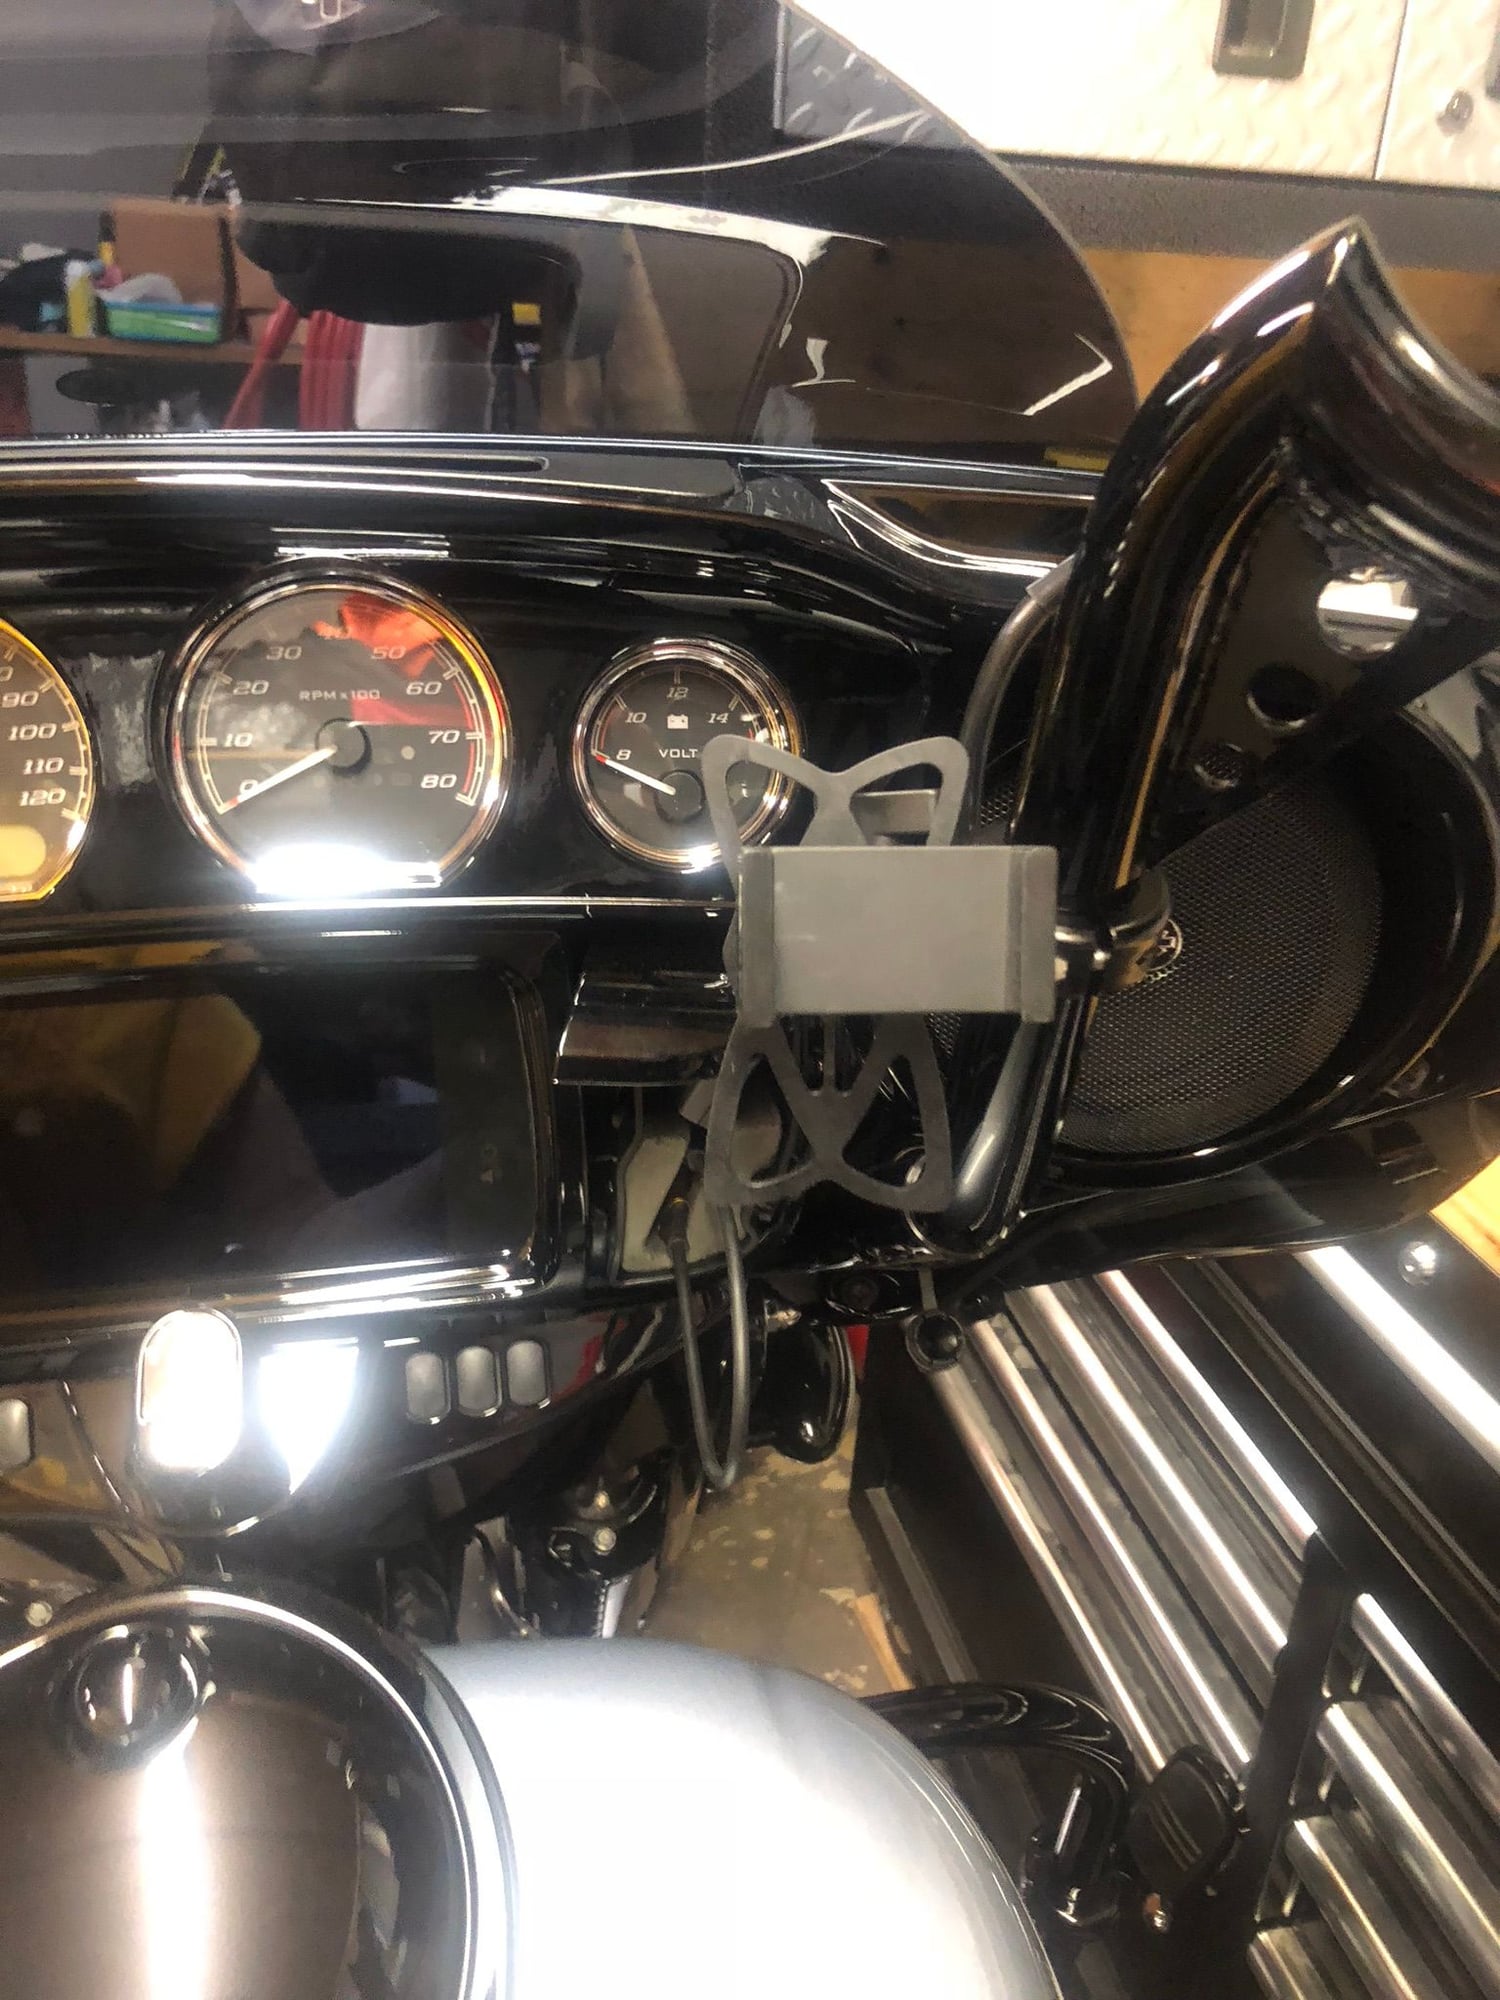 Iphone X Max Handlebar Mount For Roadking Page 2 Harley Davidson Forums